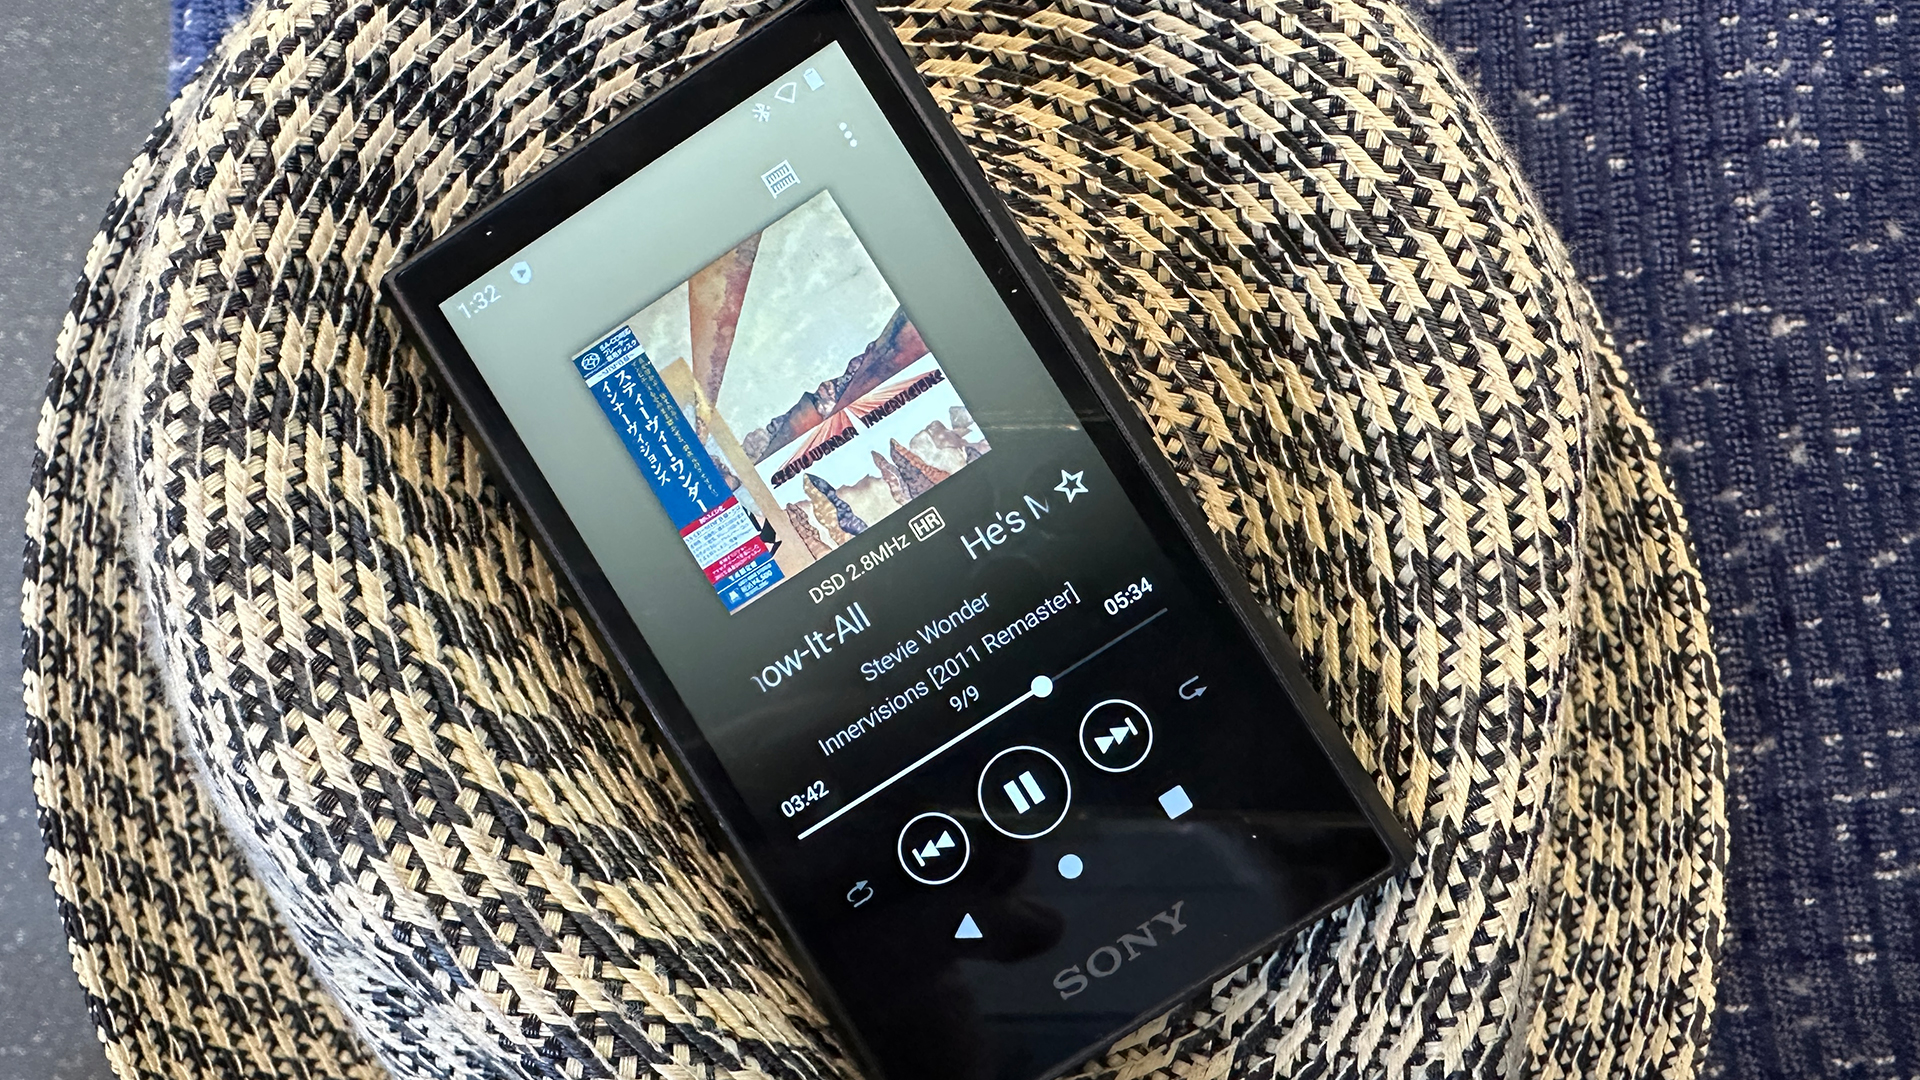 Sony's NW-A306 is a more affordable 'New Walkman